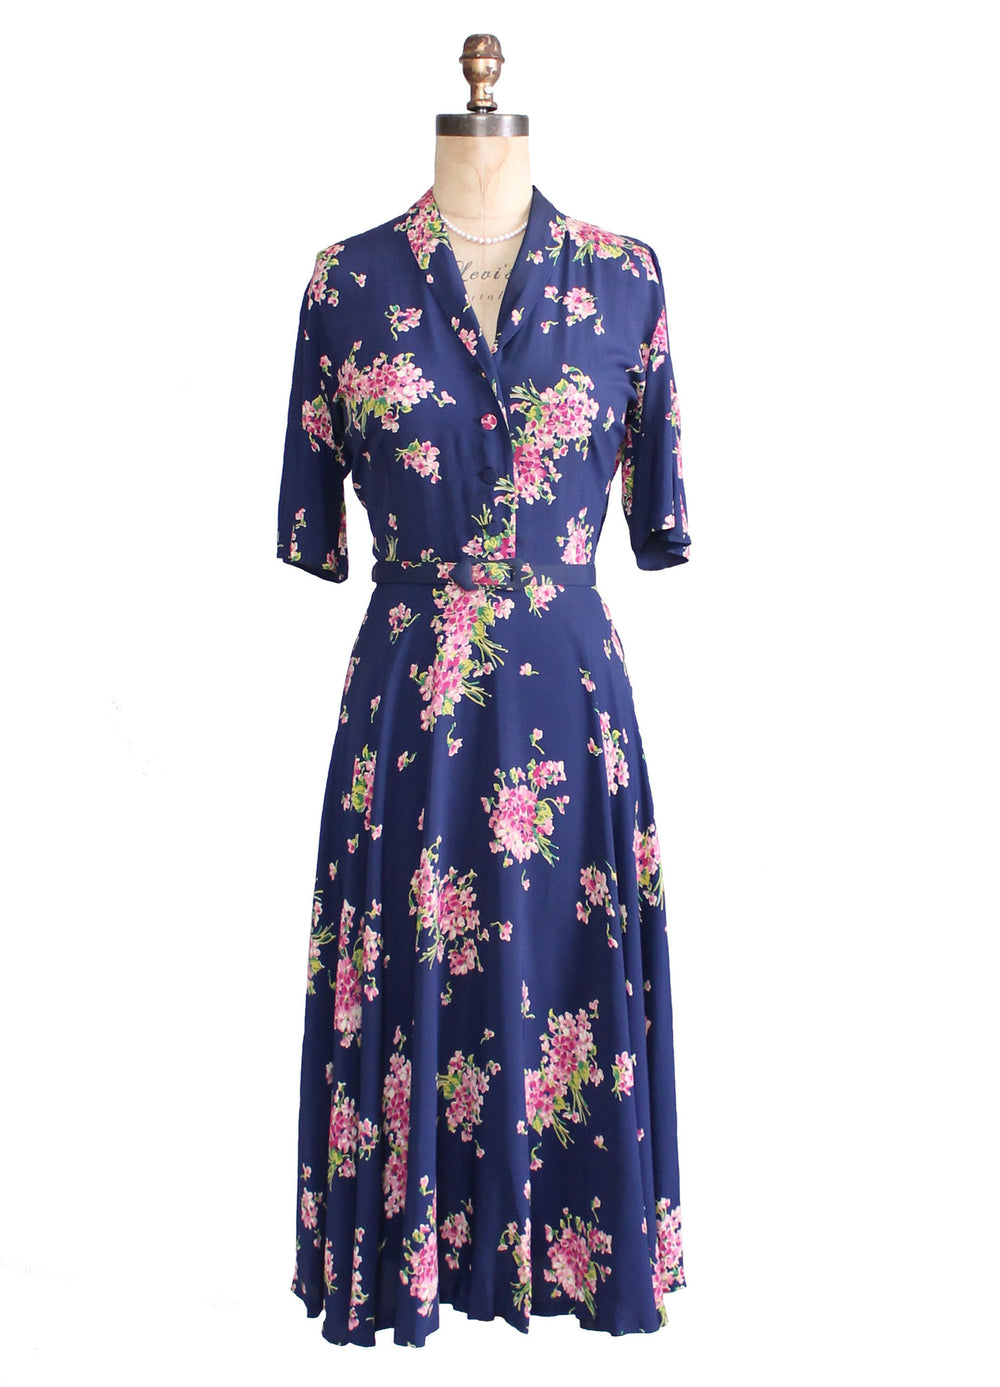 Vintage 1940s Pink Bouquet Floral Rayon Dress - Raleigh Vintage